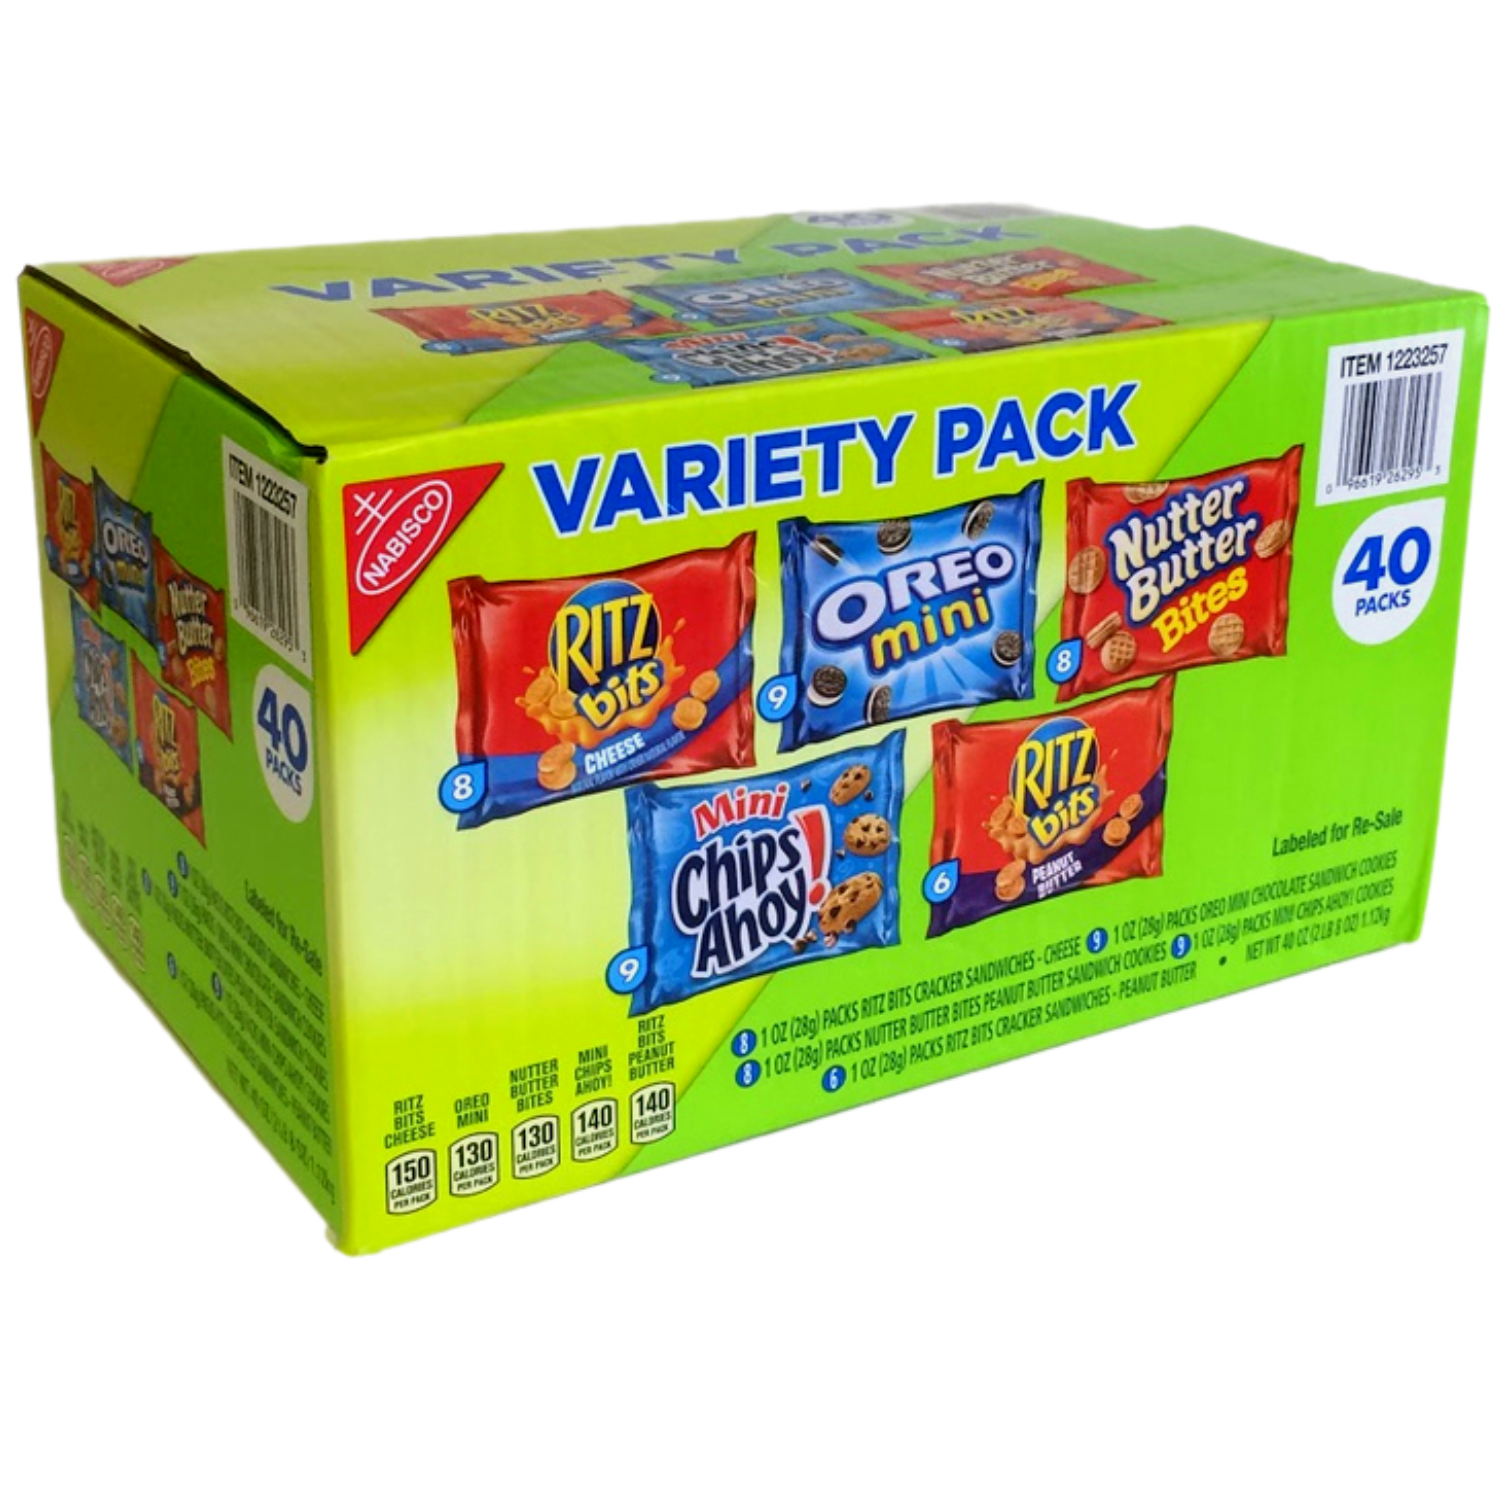 Minis, variety pack of creme-filled wafer cookies, 40-ct